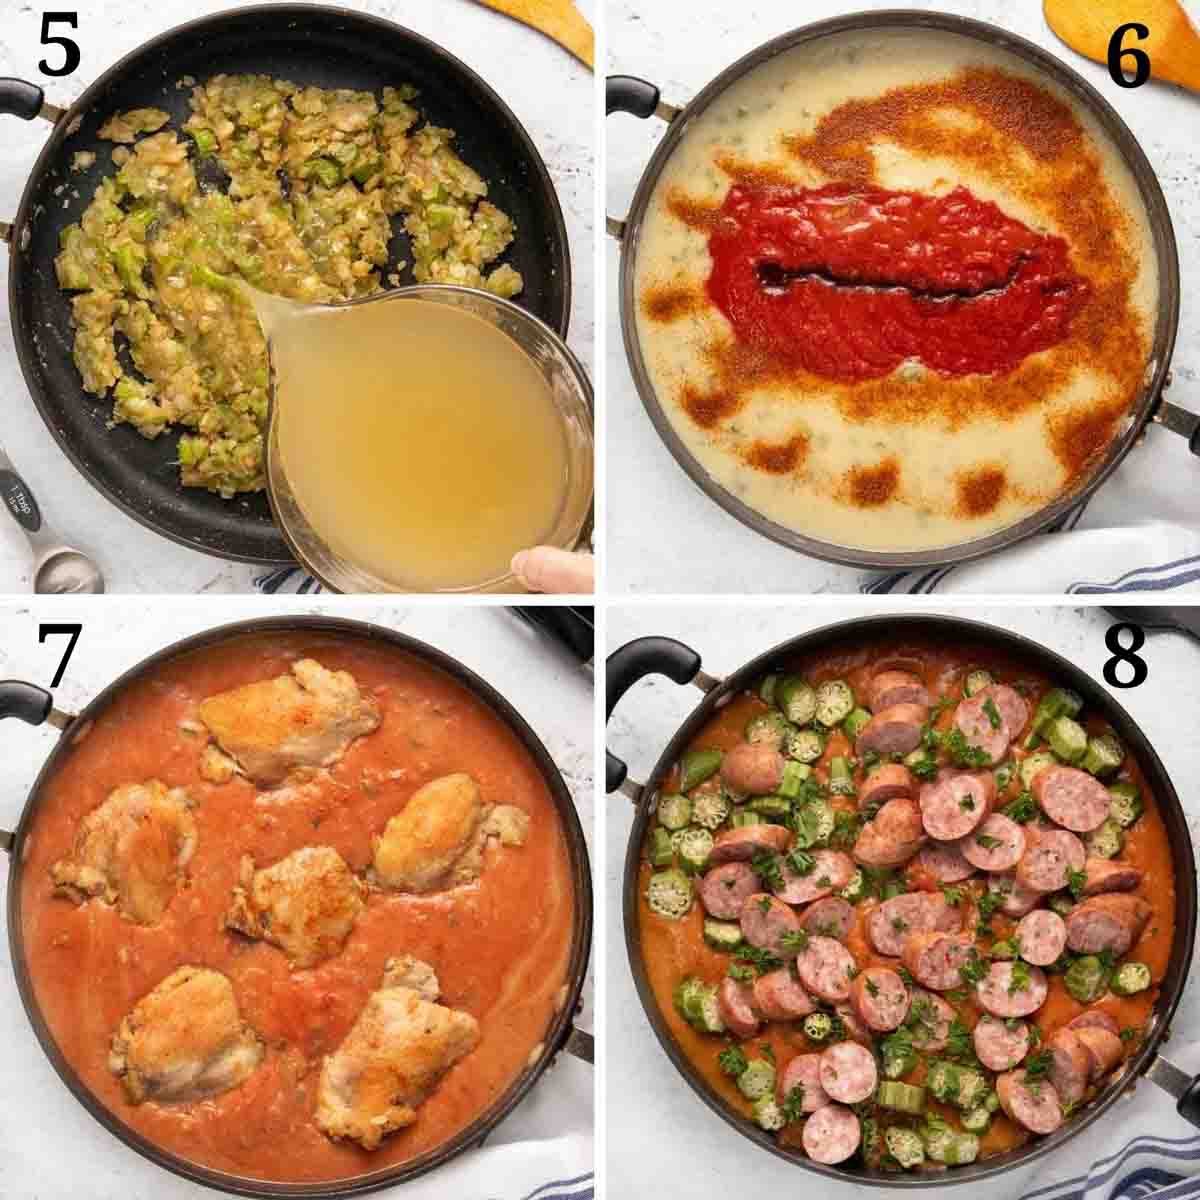 four images showing the next steps in making chicken gumbo